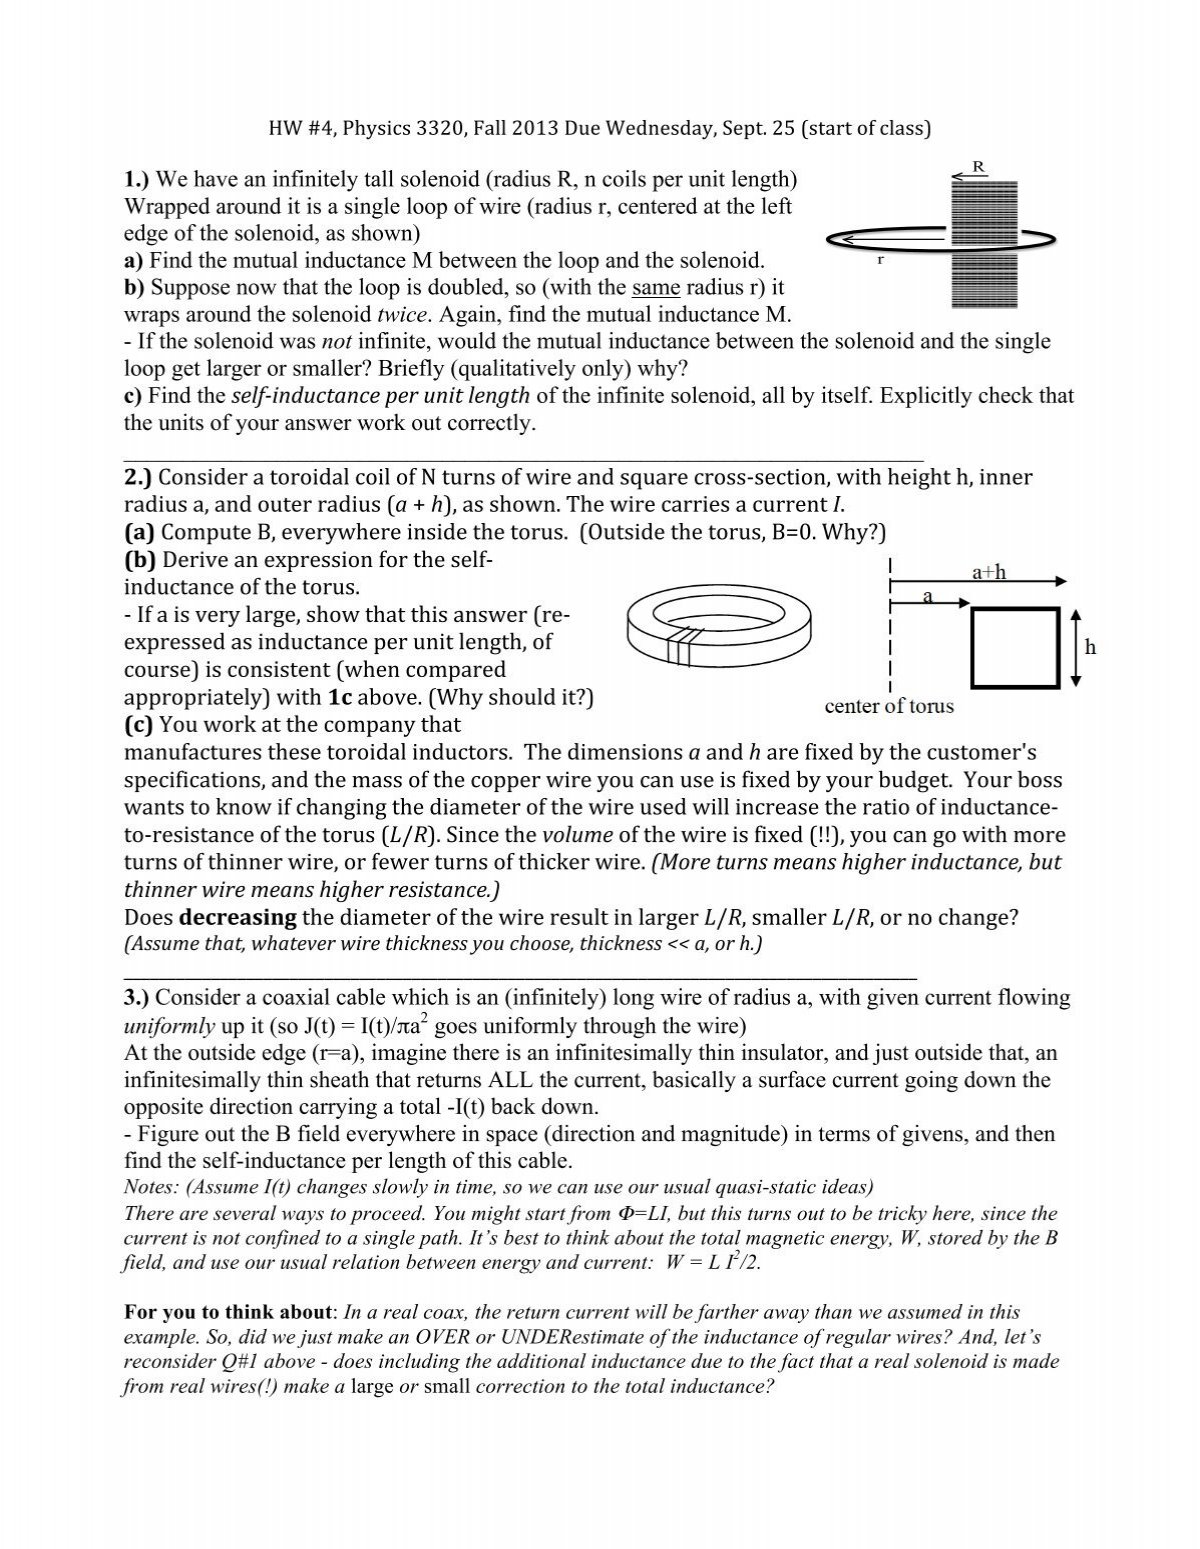 my homework lesson 4 page 713